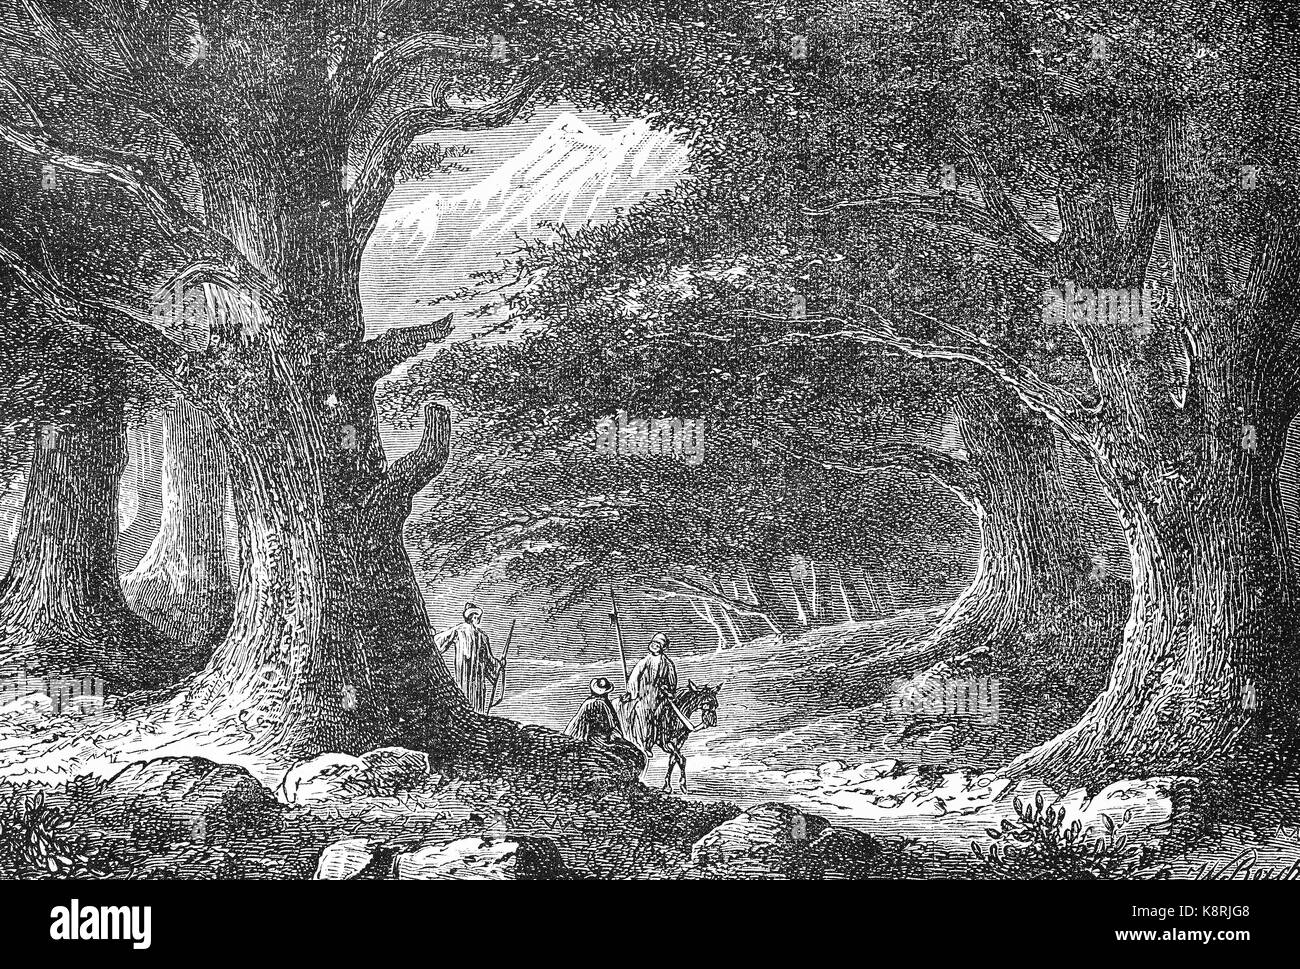 The old cedars in Lebanon, Die alten Zedern im Libanon, digital improved reproduction of a woodcut, published in the 19th century Stock Photo